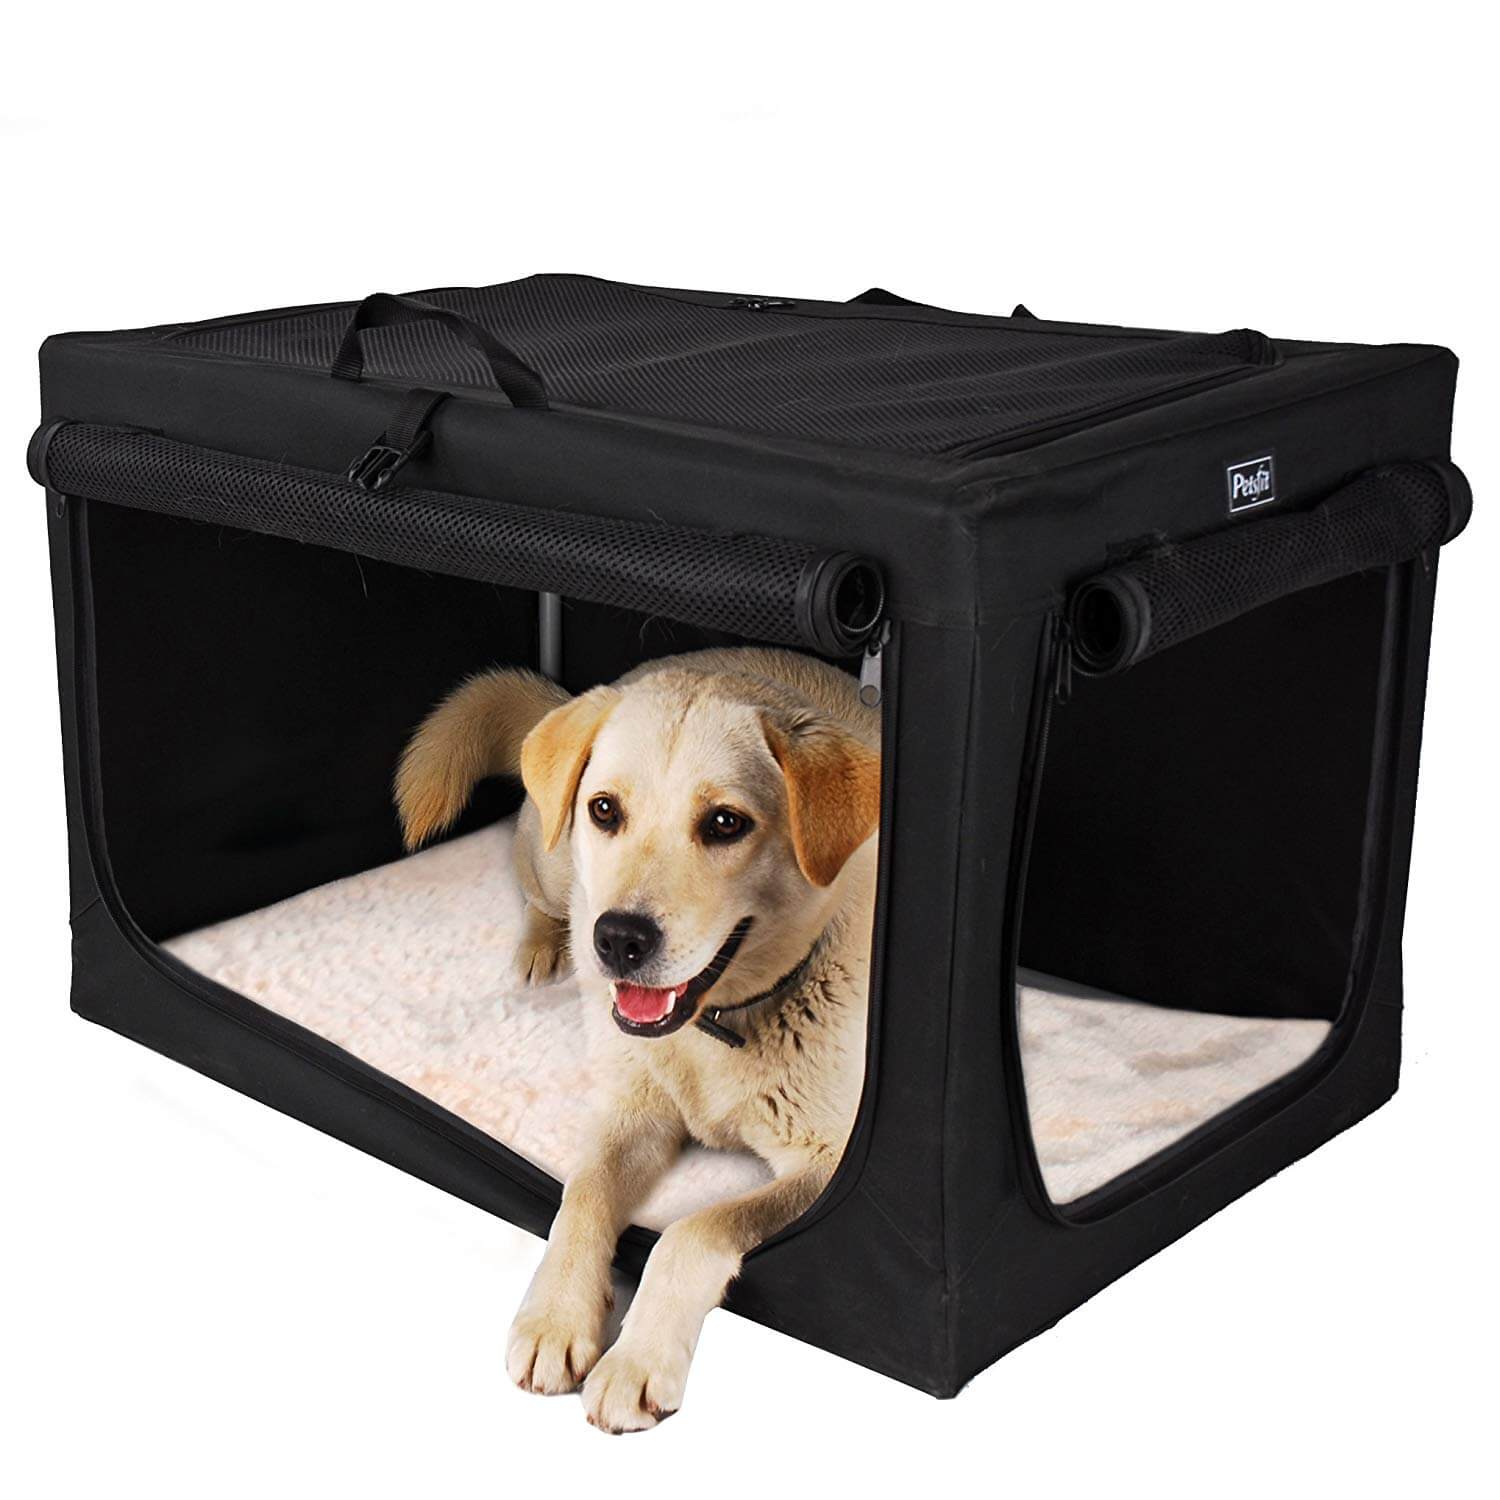 2020] The Best Soft Dog Crates | PawGearLab